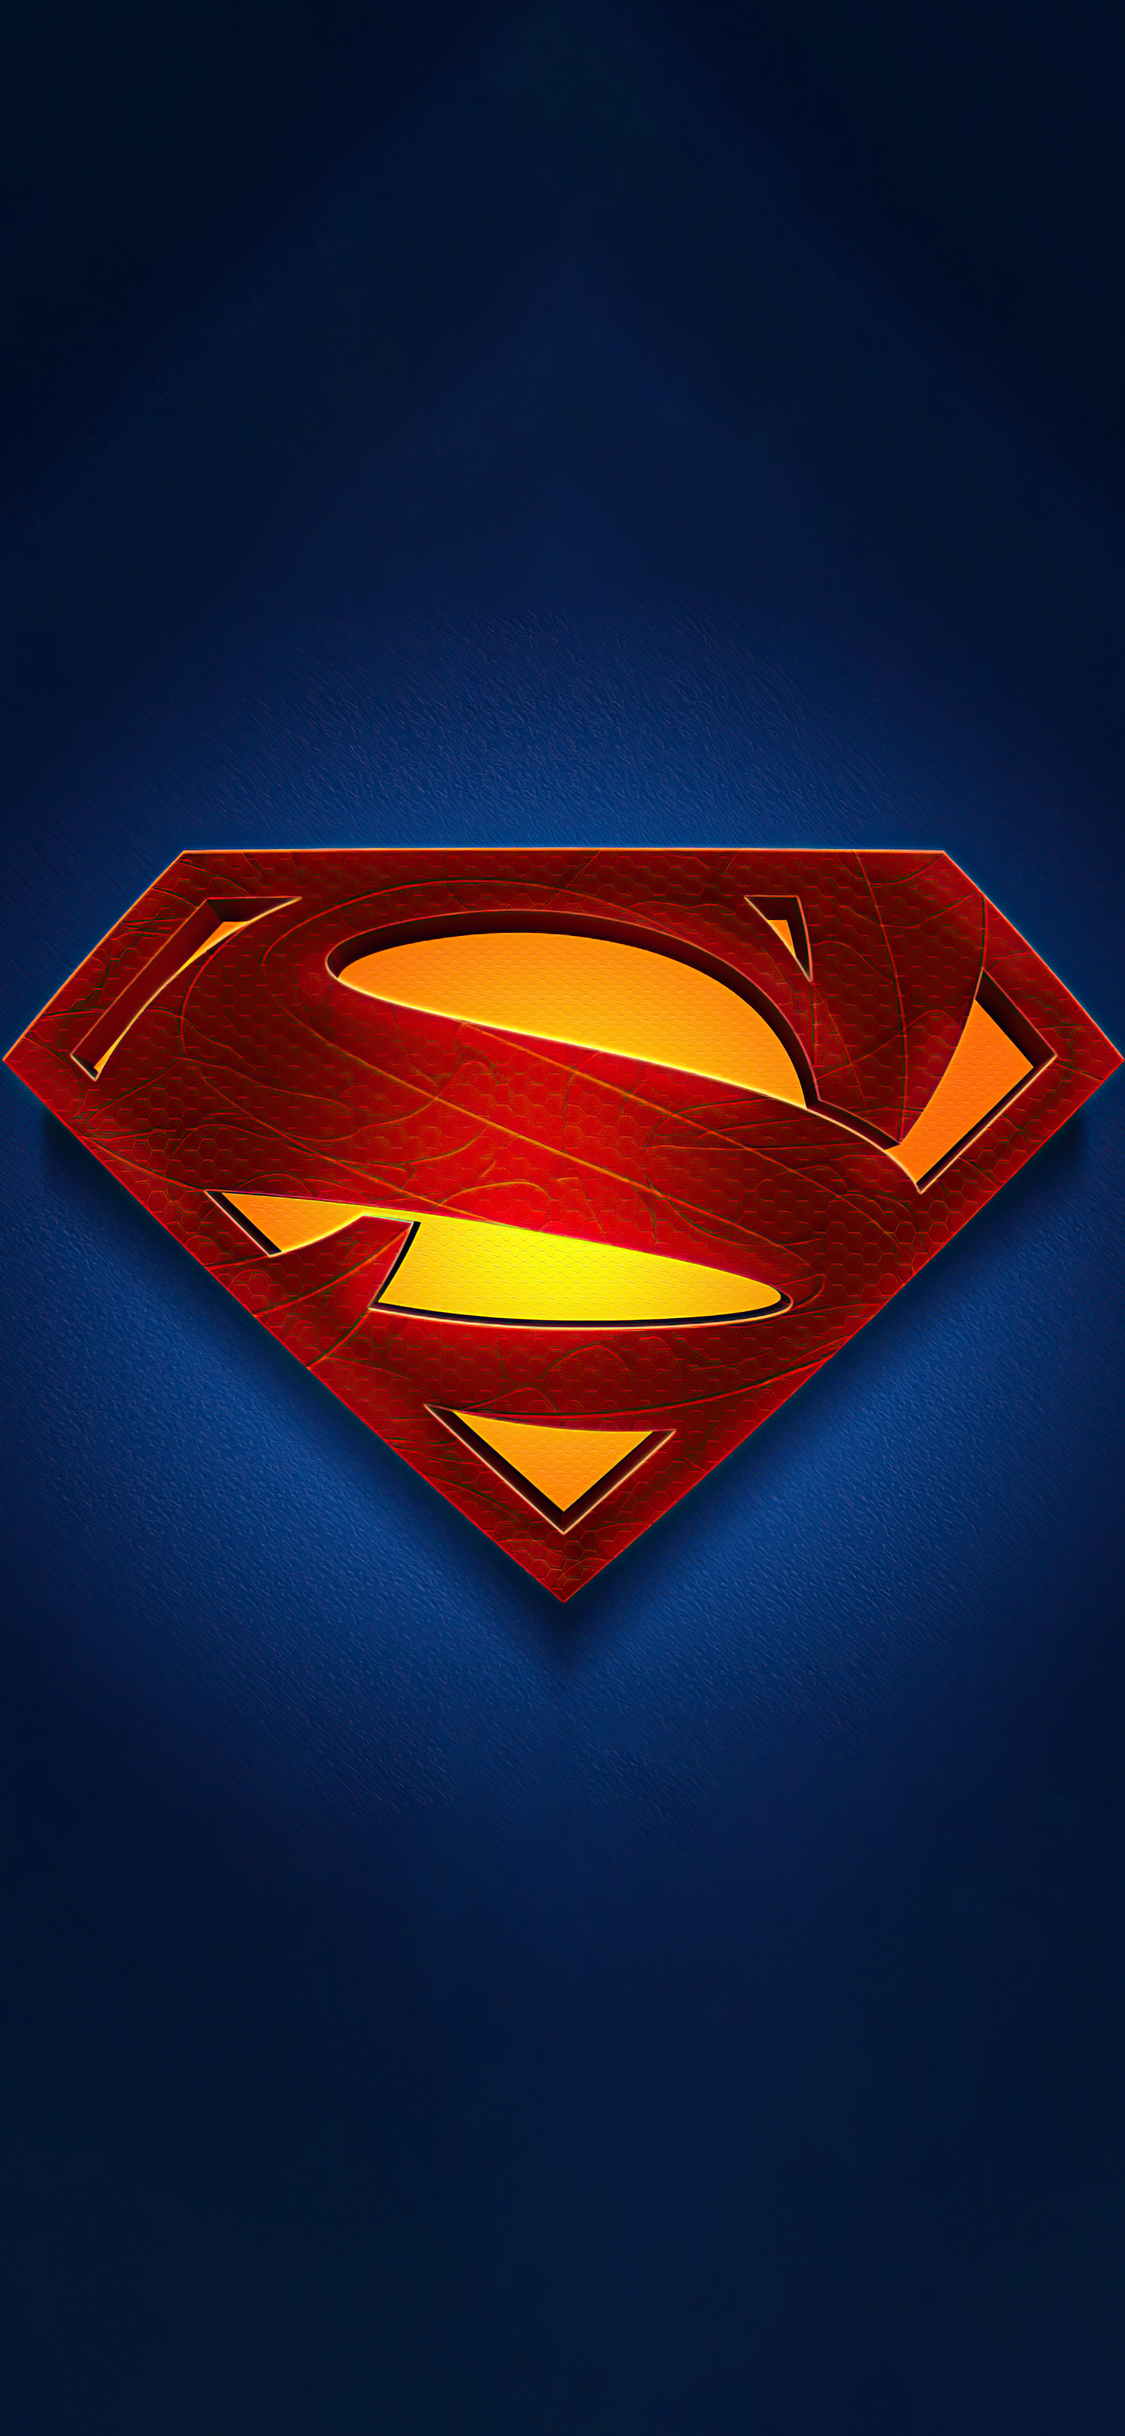 1125x2436 Superman Emblem Iphone XS,Iphone 10,Iphone X HD 4k Wallpapers, Images, Backgrounds, Photos and Pictures